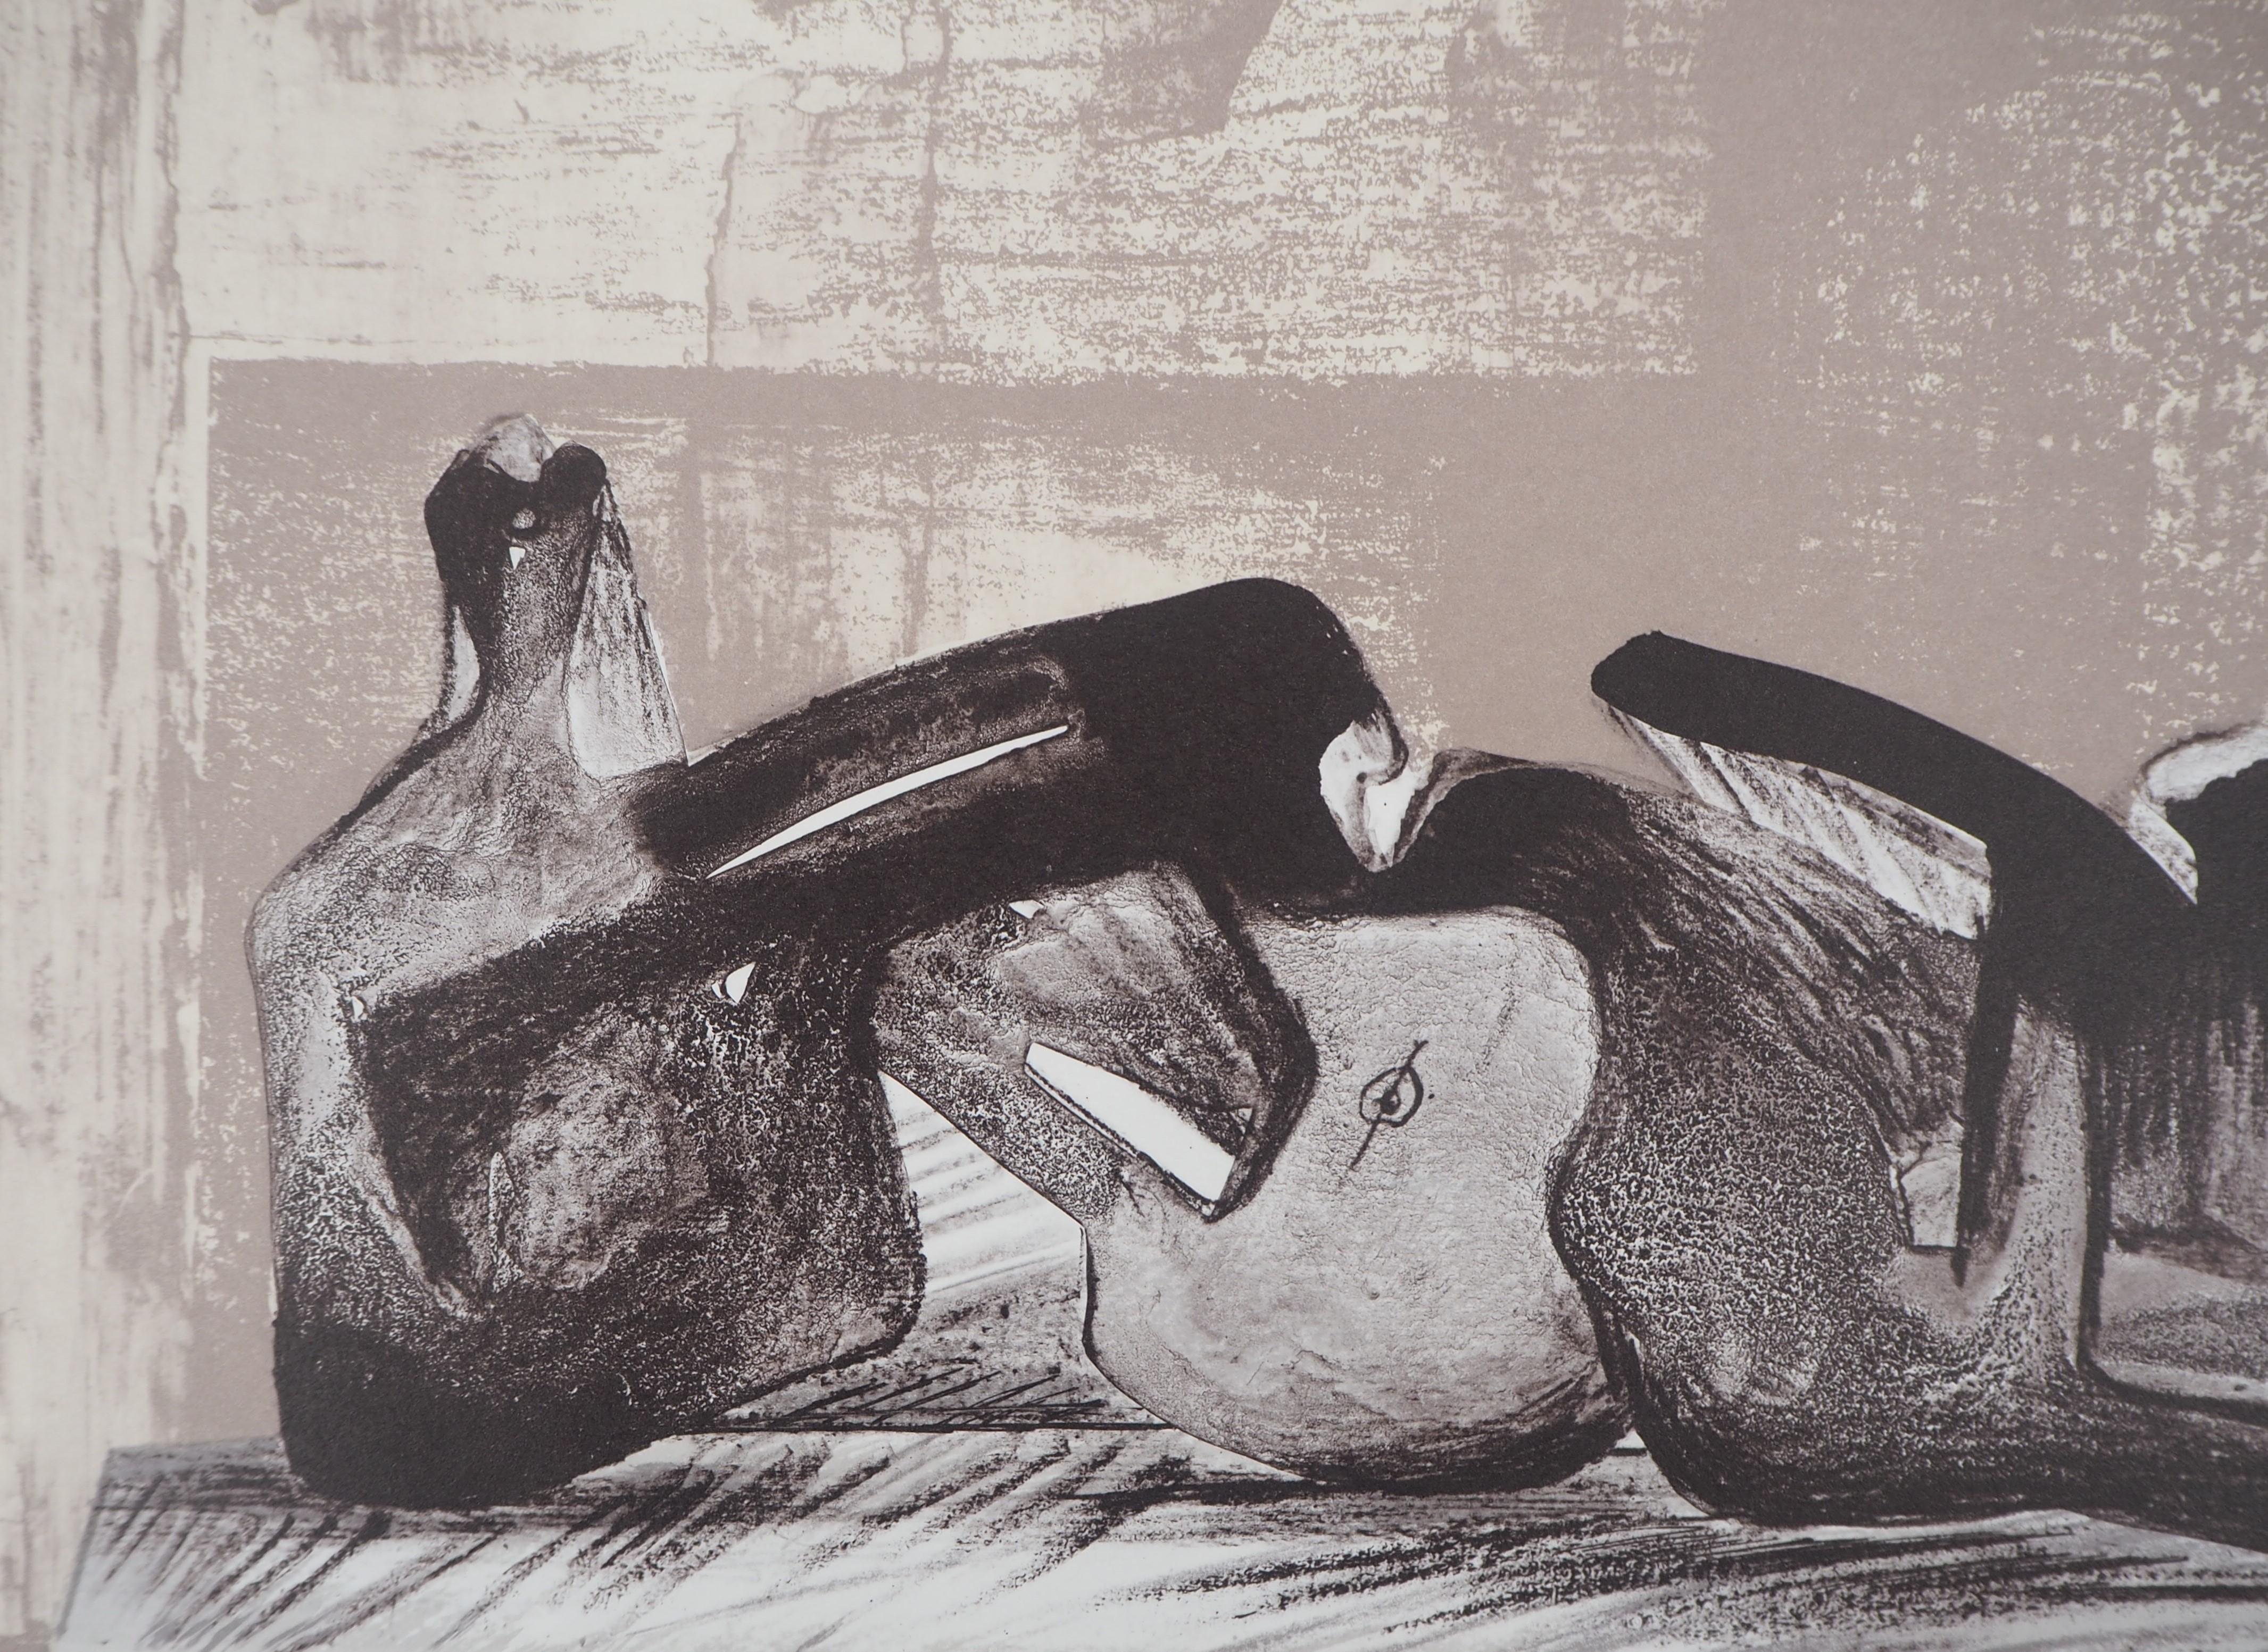 Reclining Figure - Original lithograph - Modern Print by Henry Moore